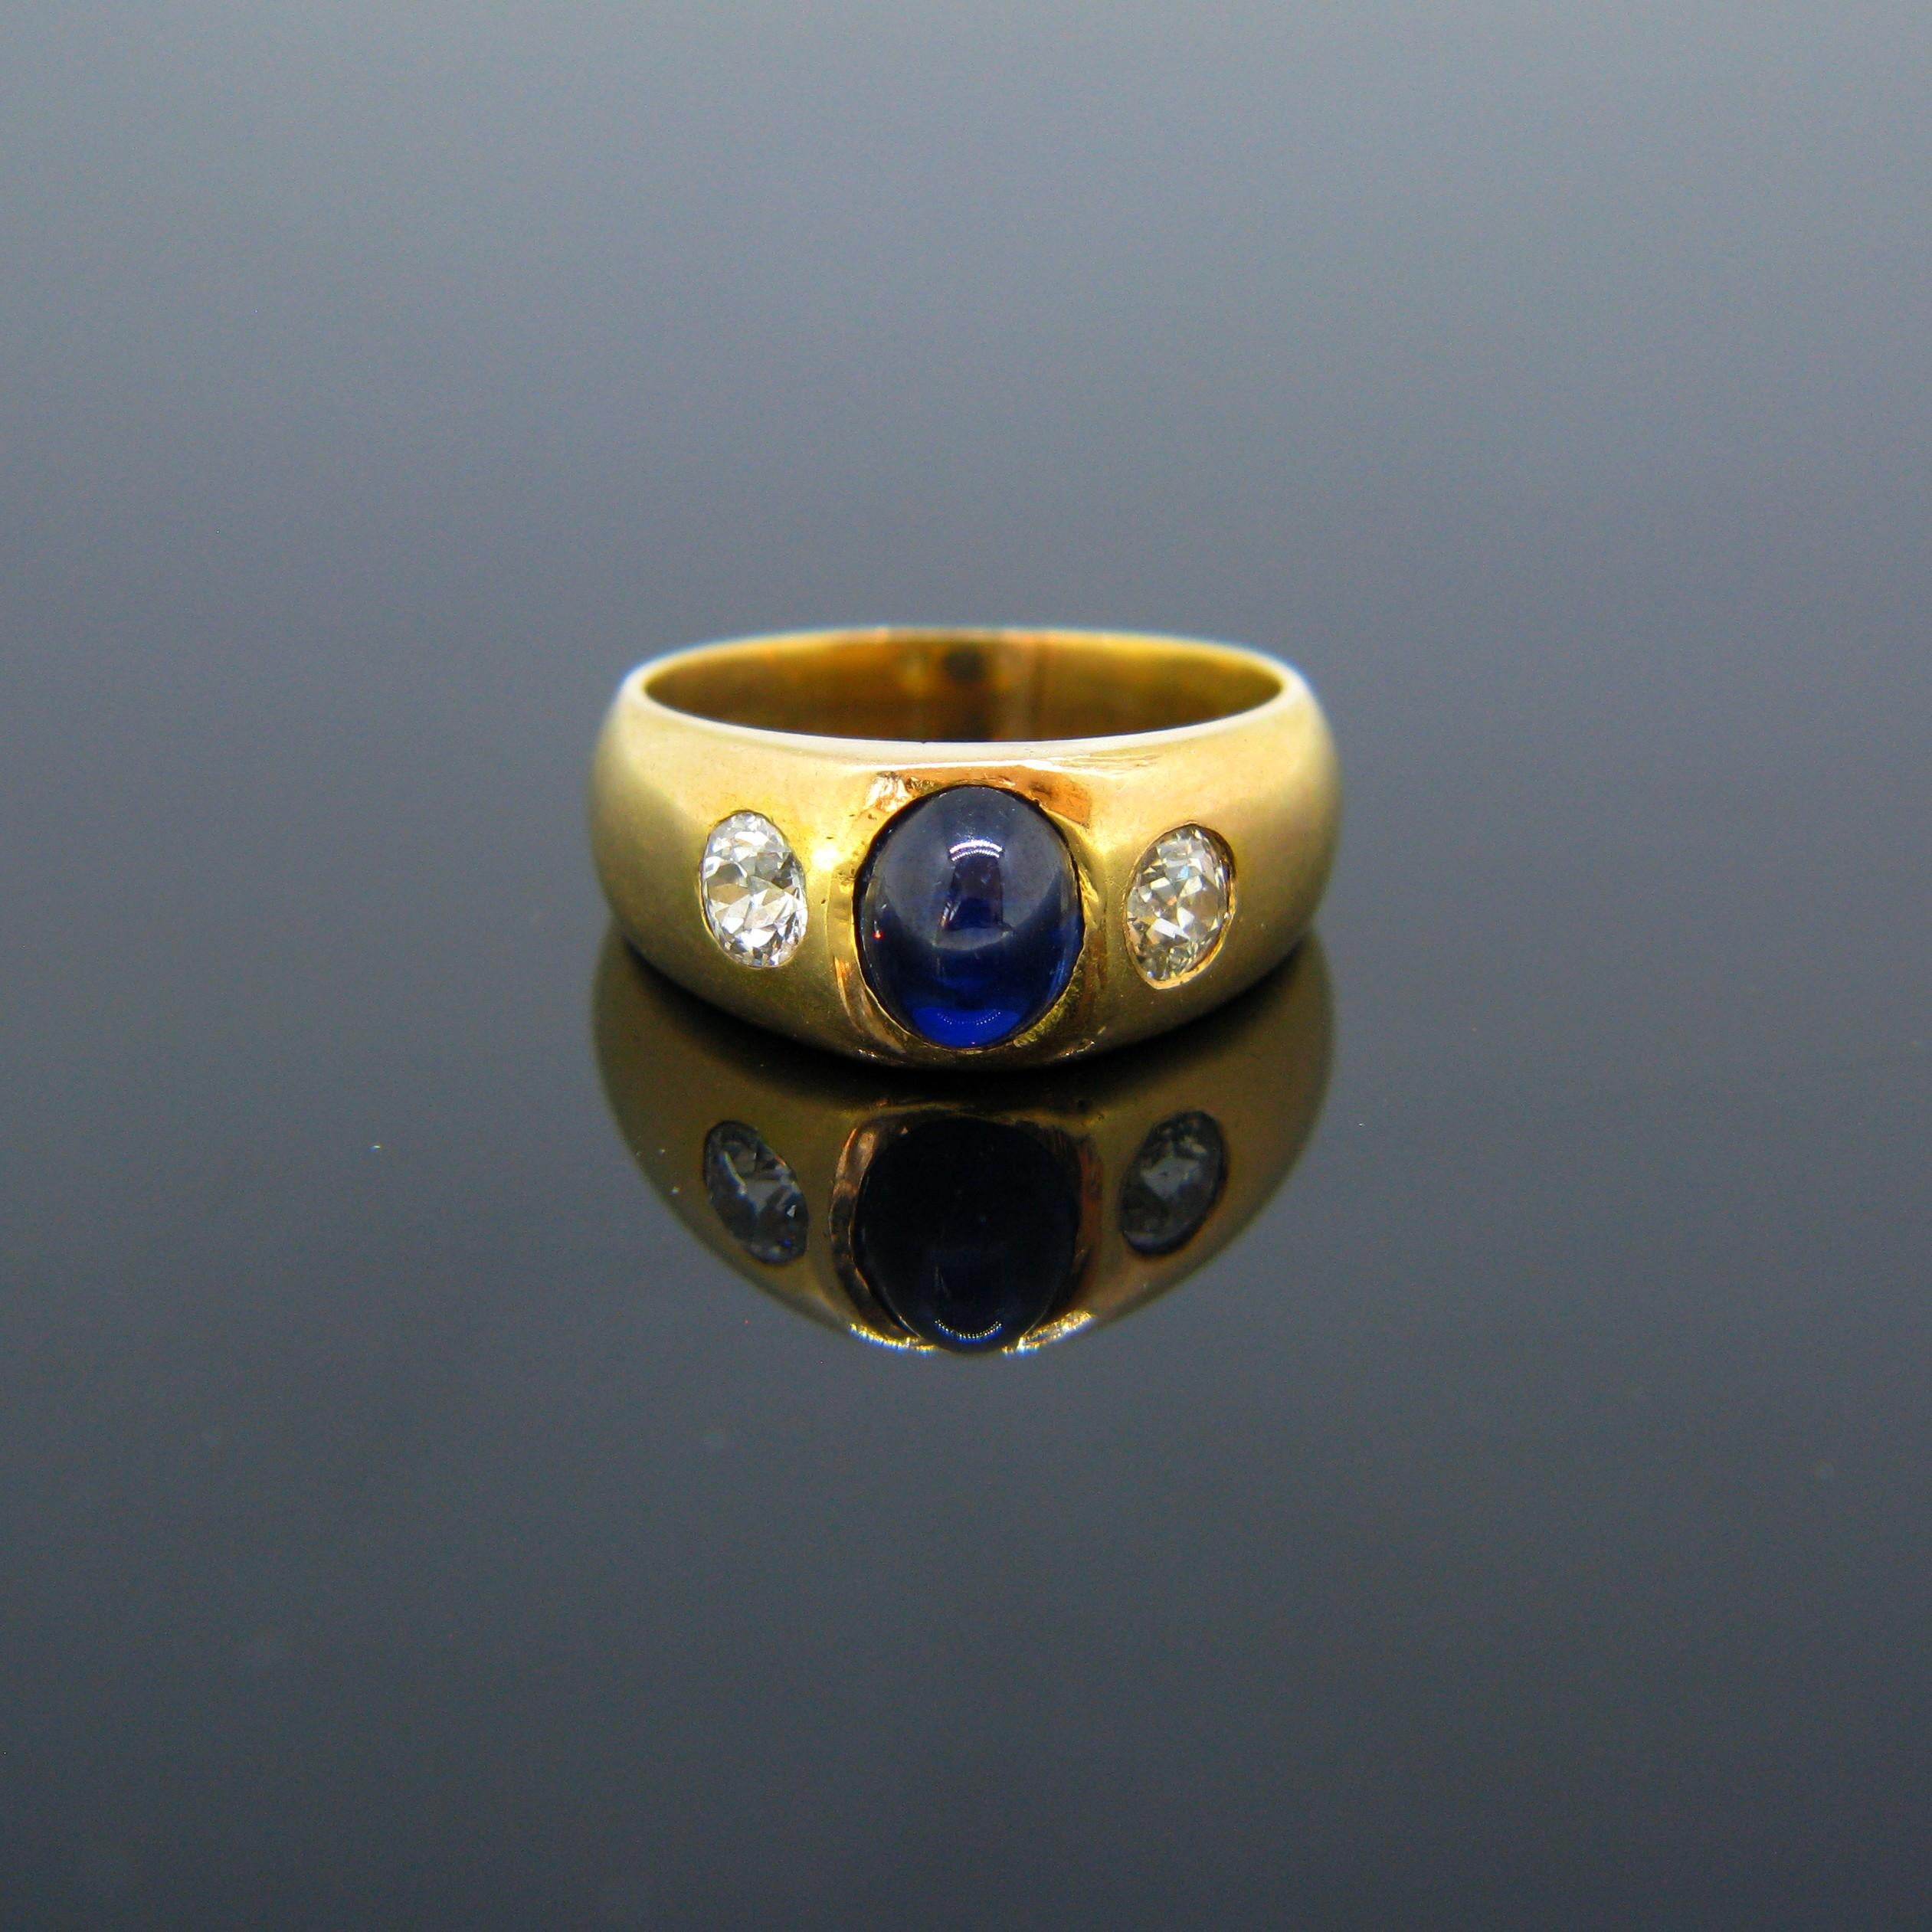 This beautiful vintage gypsy ring is set with a cabochon cut sapphire weighing approximately 2.50ct and adorned with two old cut diamonds each weighing around 0.30ct. It is fully made in 18kt yellow gold and is marked with the